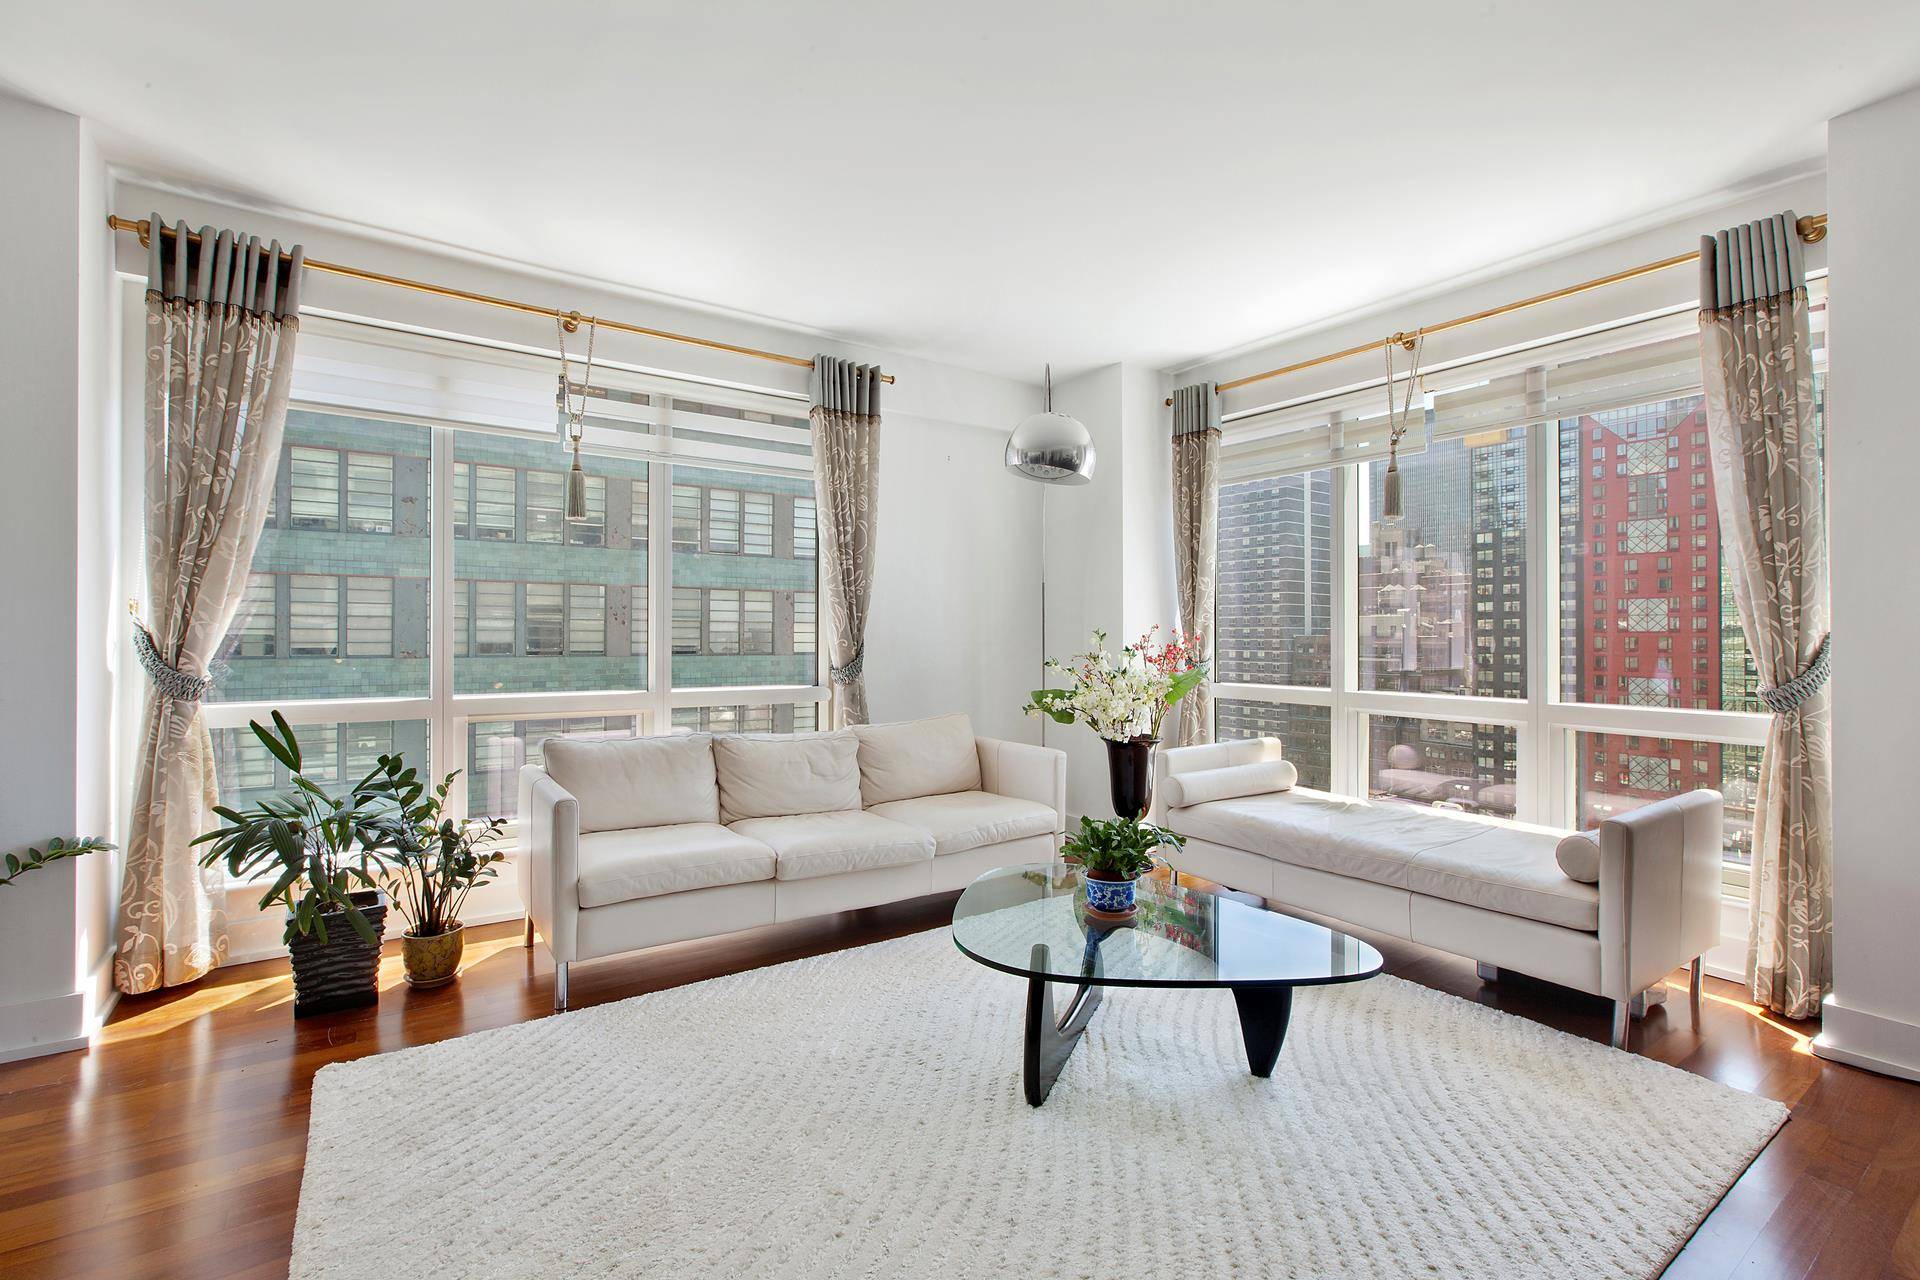 Experience the quintessential city life at 350 West 42nd Street in this 2 bedroom, 2 bathroom meticulously updated condo, located on the 20th floor in the heart of Manhattan with ...